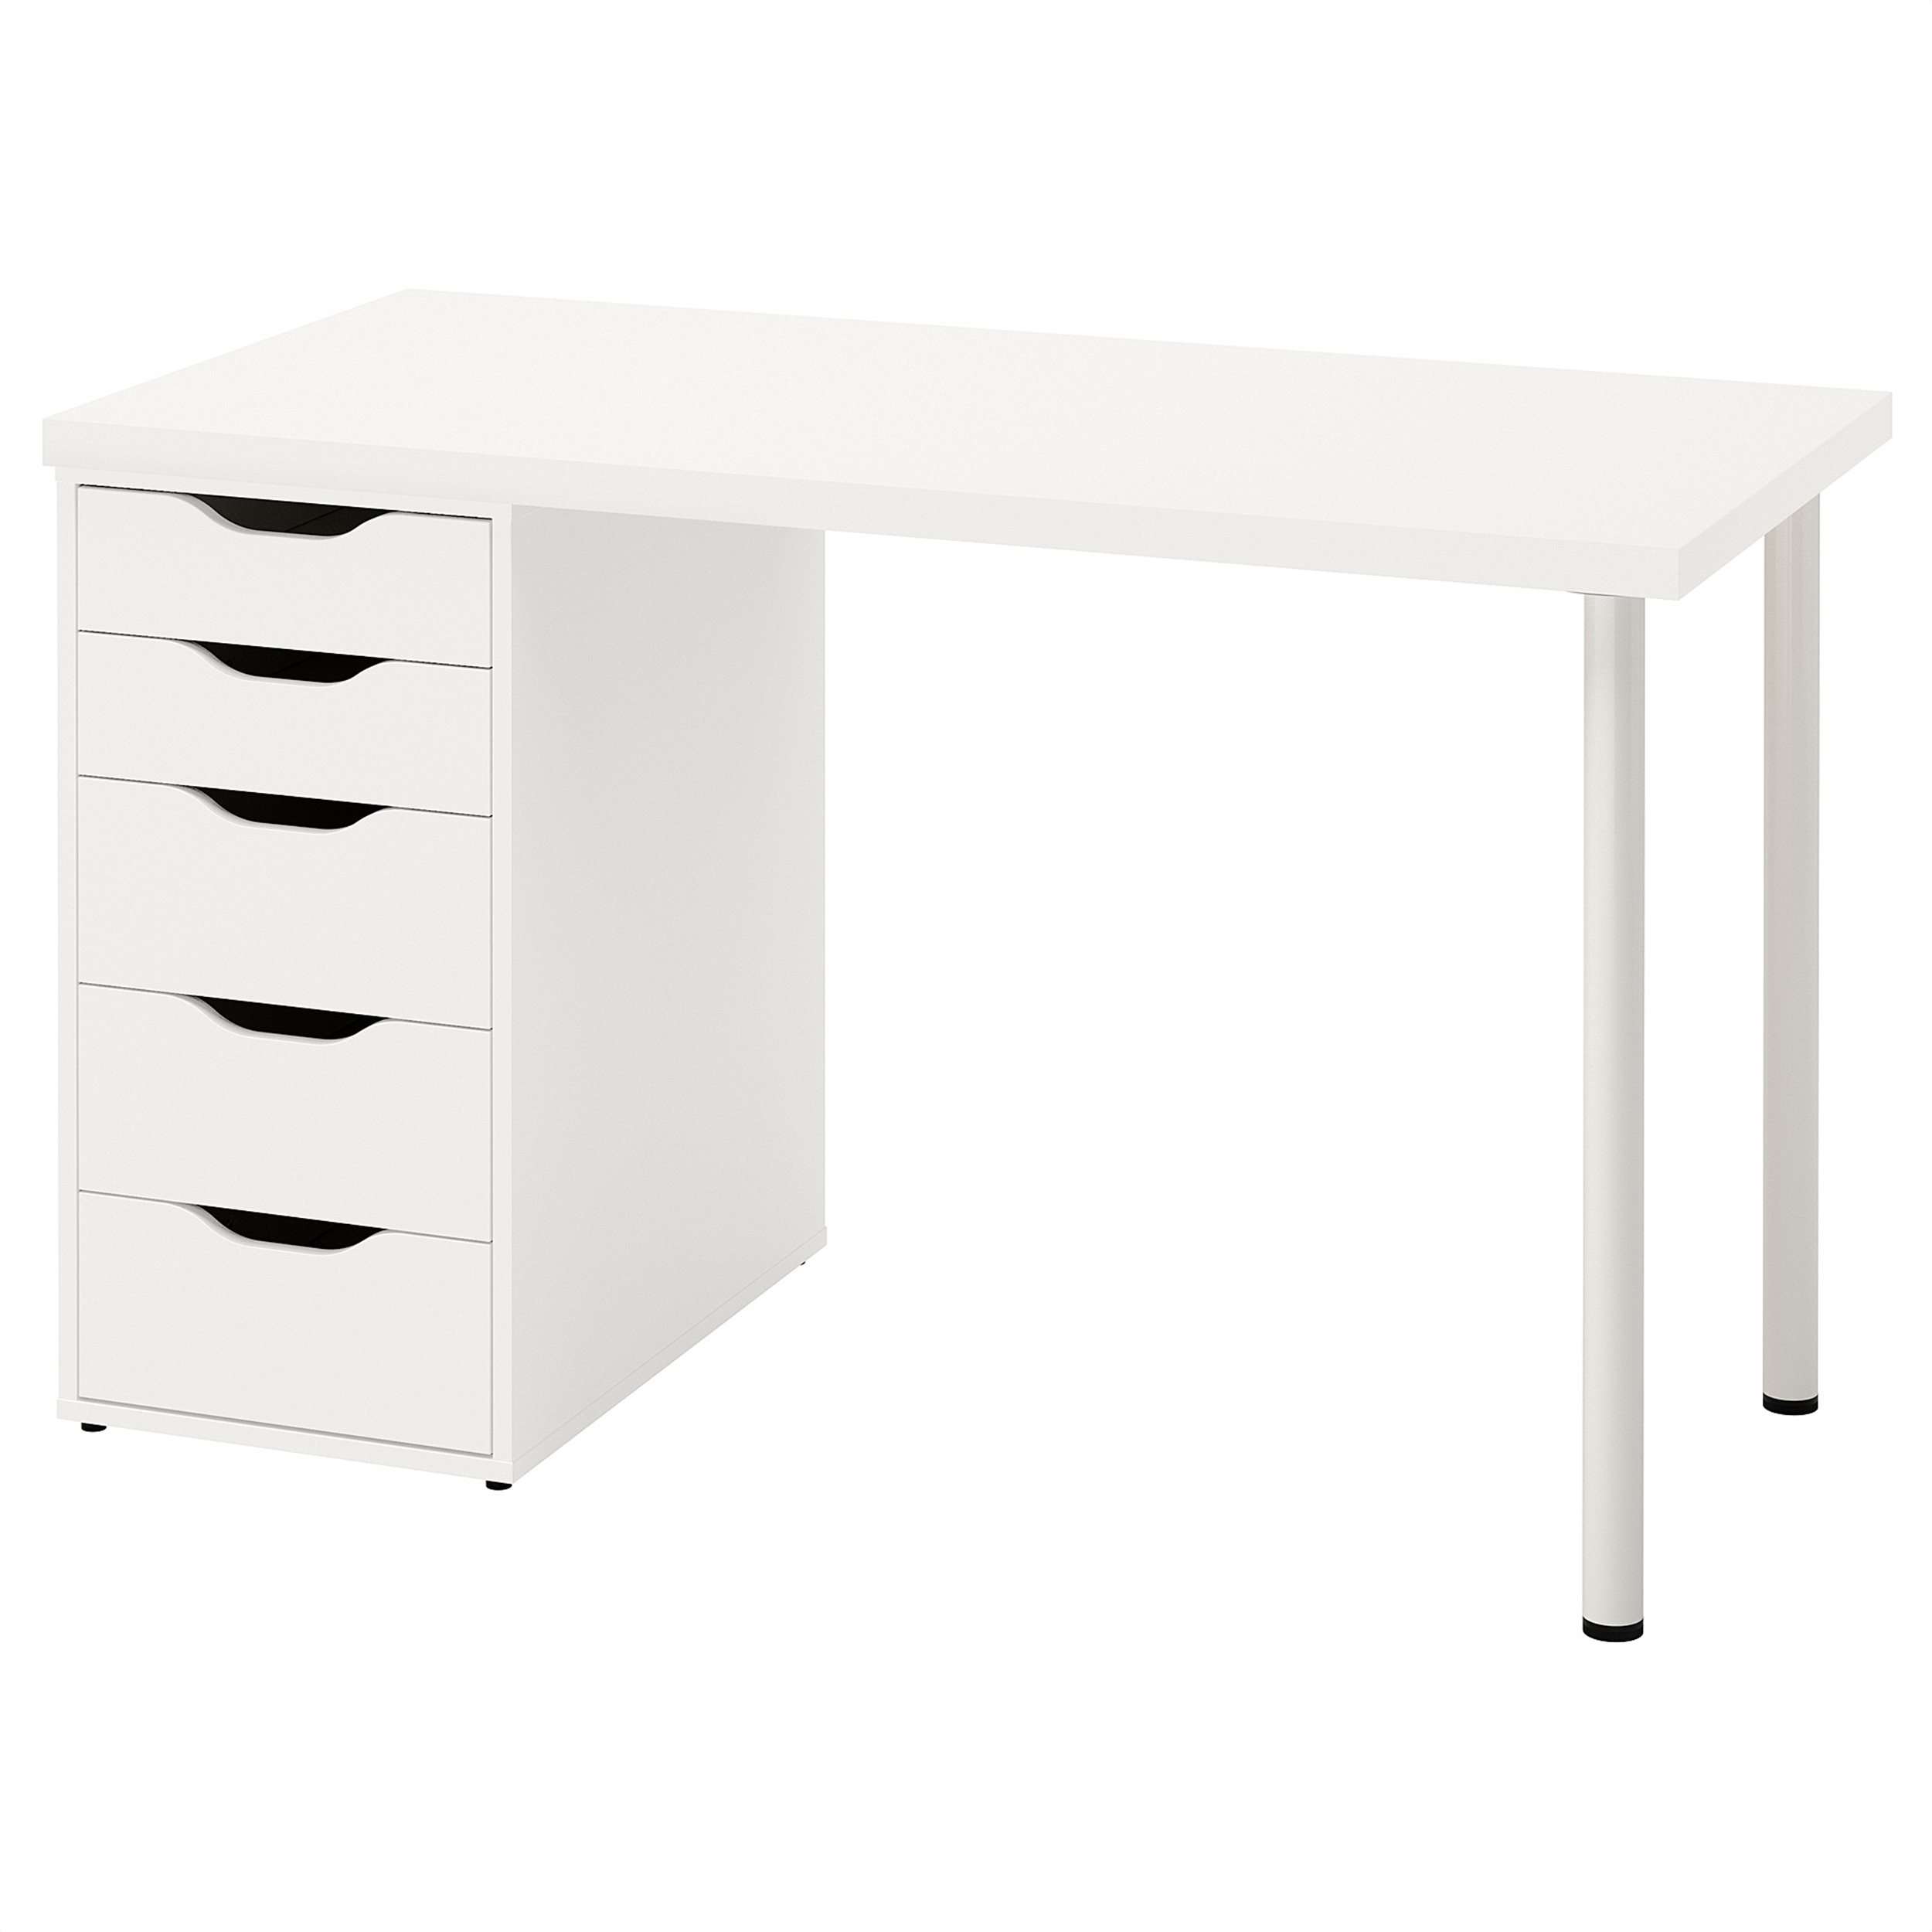 Corner Ikea Alex Desk Dimensions with Wall Mounted Monitor